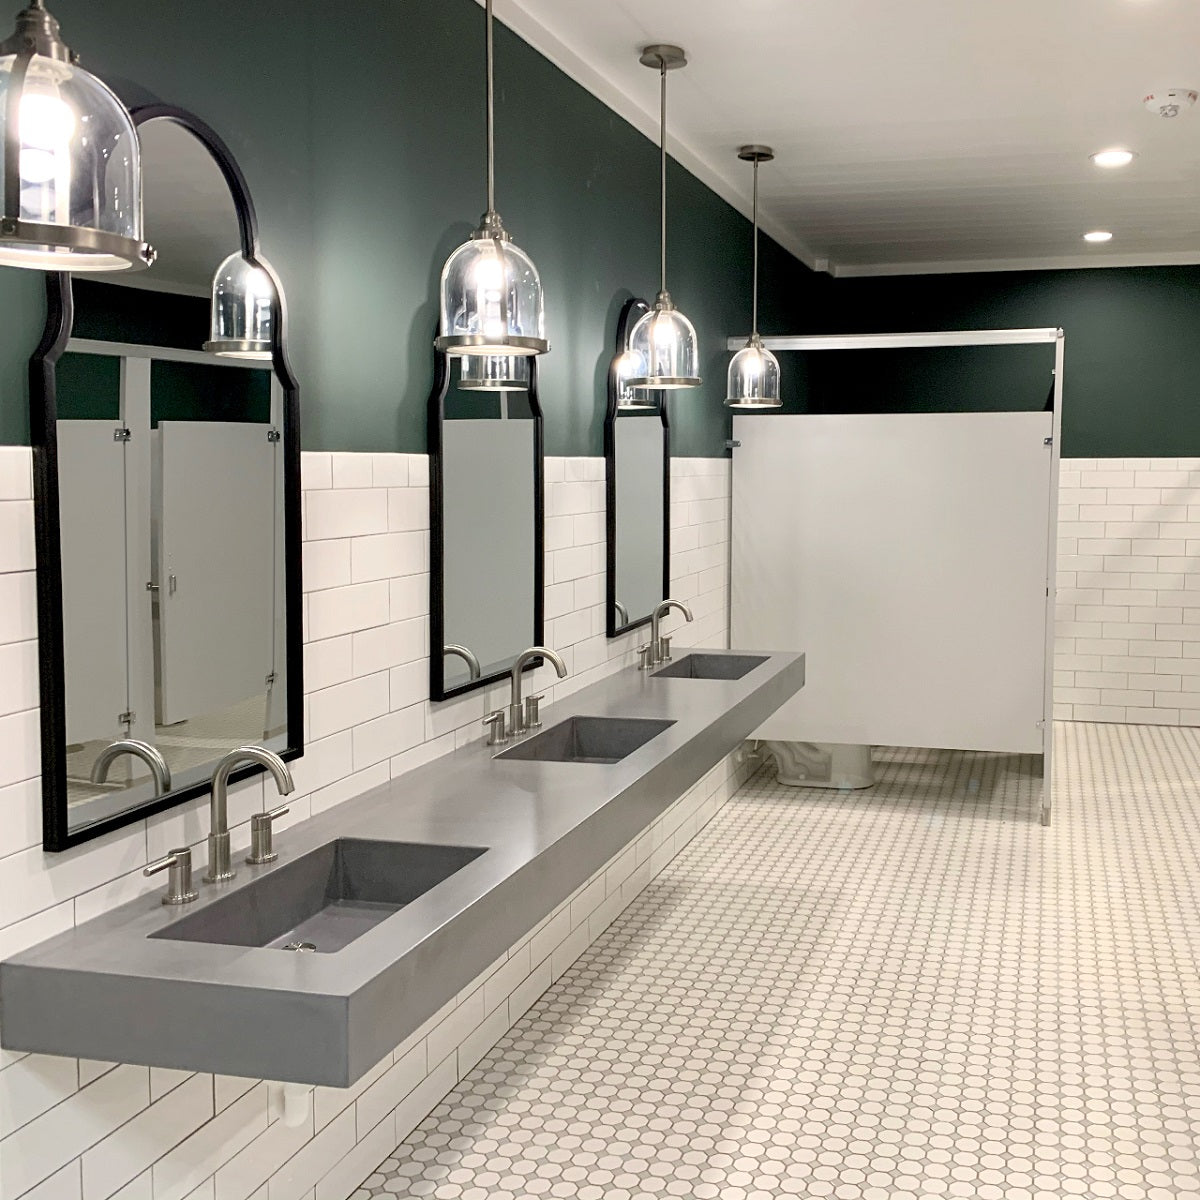 Commercial restroom with floating concrete vanity sinks.